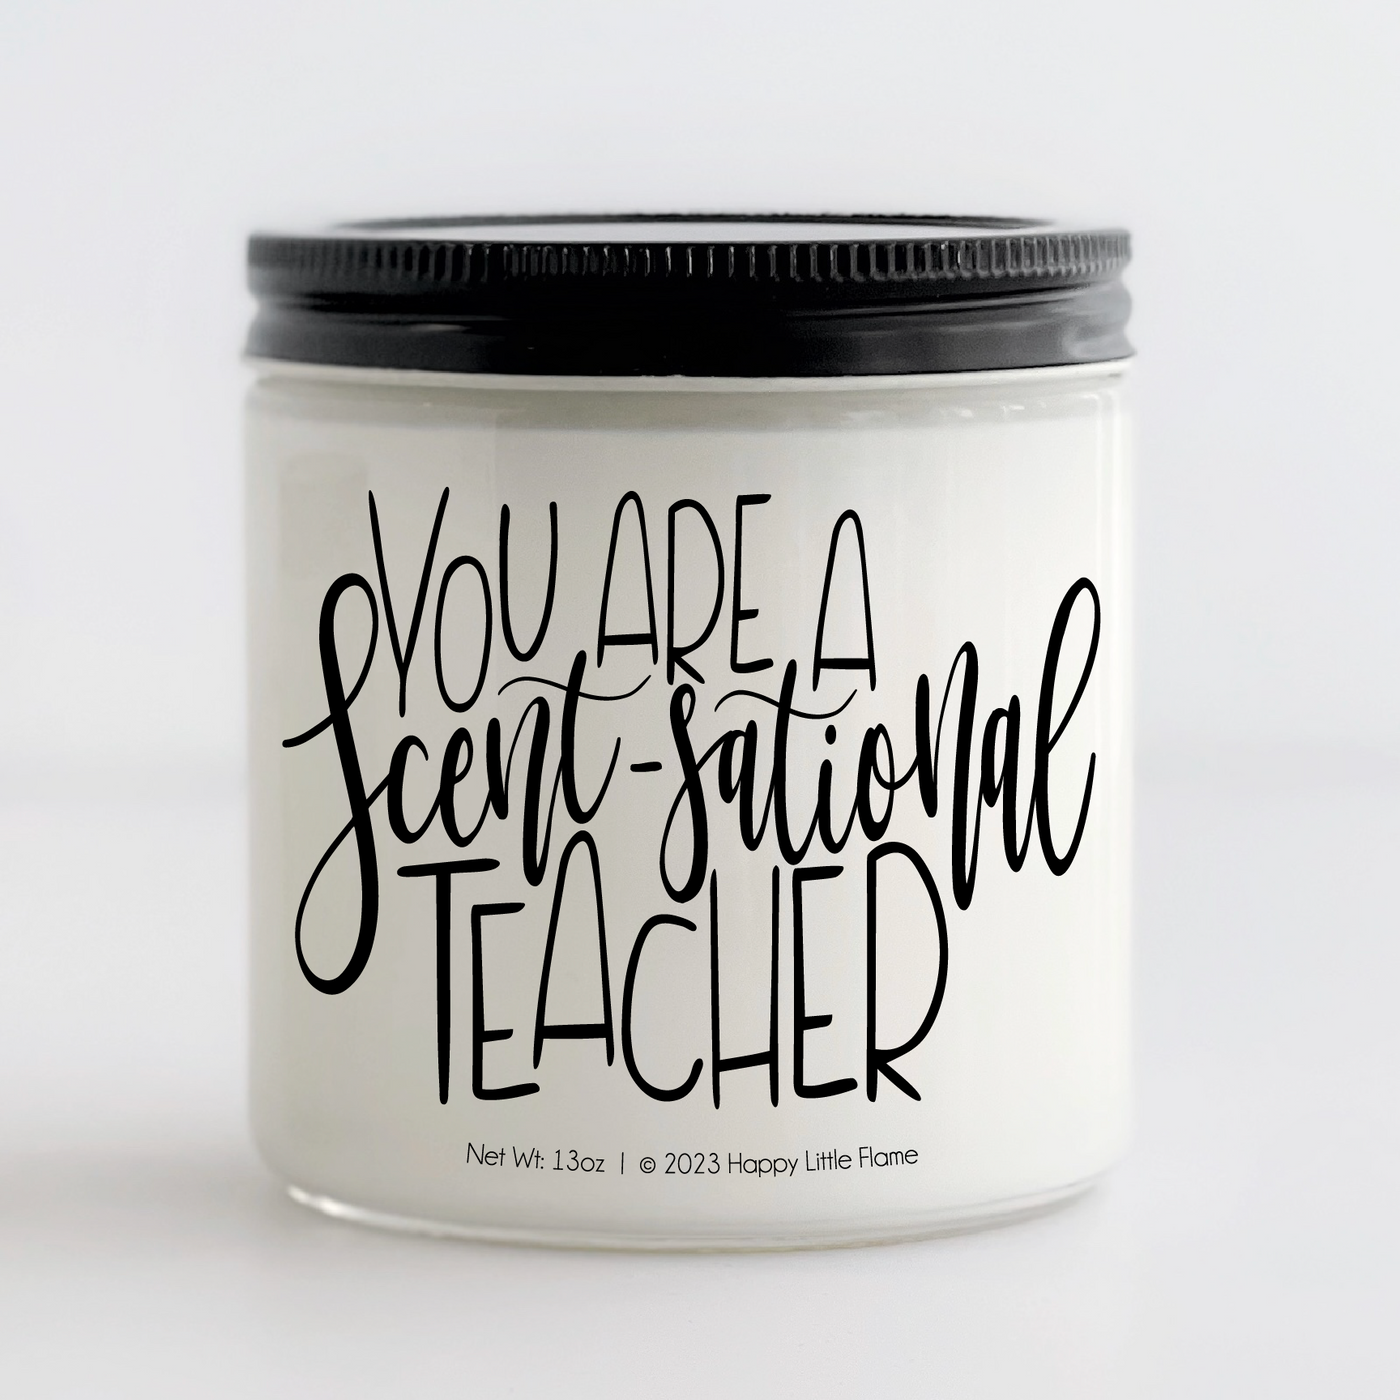 You Are A Scent-sational Teacher